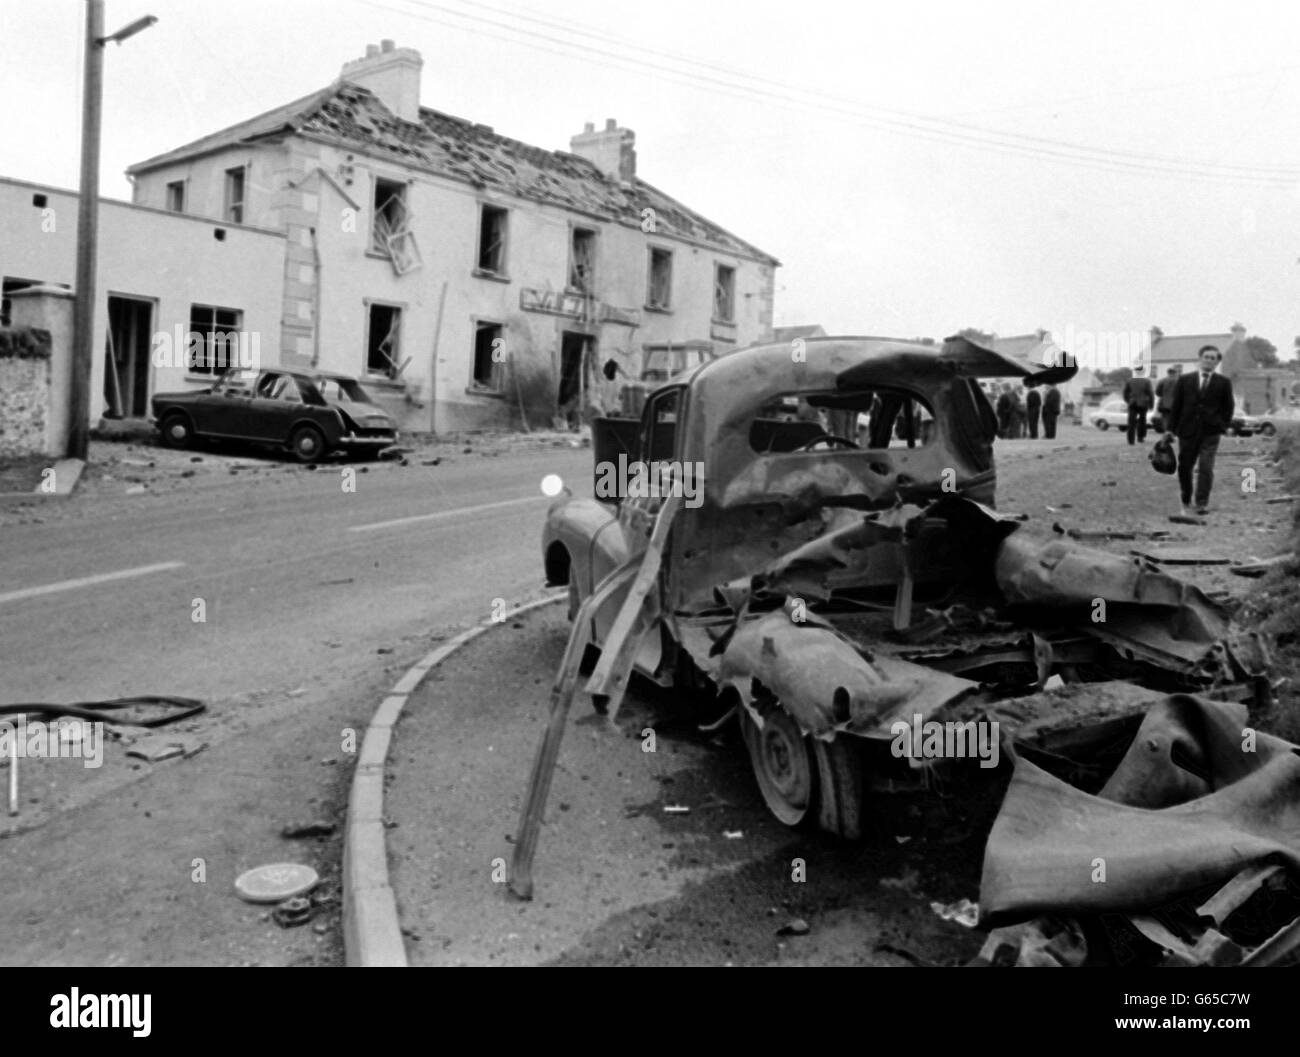 Wreckage is seen outside the Beavpont Arms, itself badly damaged, in this Northern Ireland vilage. Three people died in the explosion, one out of three which took place in the neighbourhood. * 20/12/2002: The British Government and the Catholic Church were involved in an astonishing cover-up to shield a priest suspected of heading-up the IRA team responsible for one of Northern Ireland s worst ever bomb atrocities, police claimed Friday December 20, 2002. Just months after the July 1972 attack on the village of Claudy, Co Londonderry, which left nine people dead, including three children, it Stock Photo